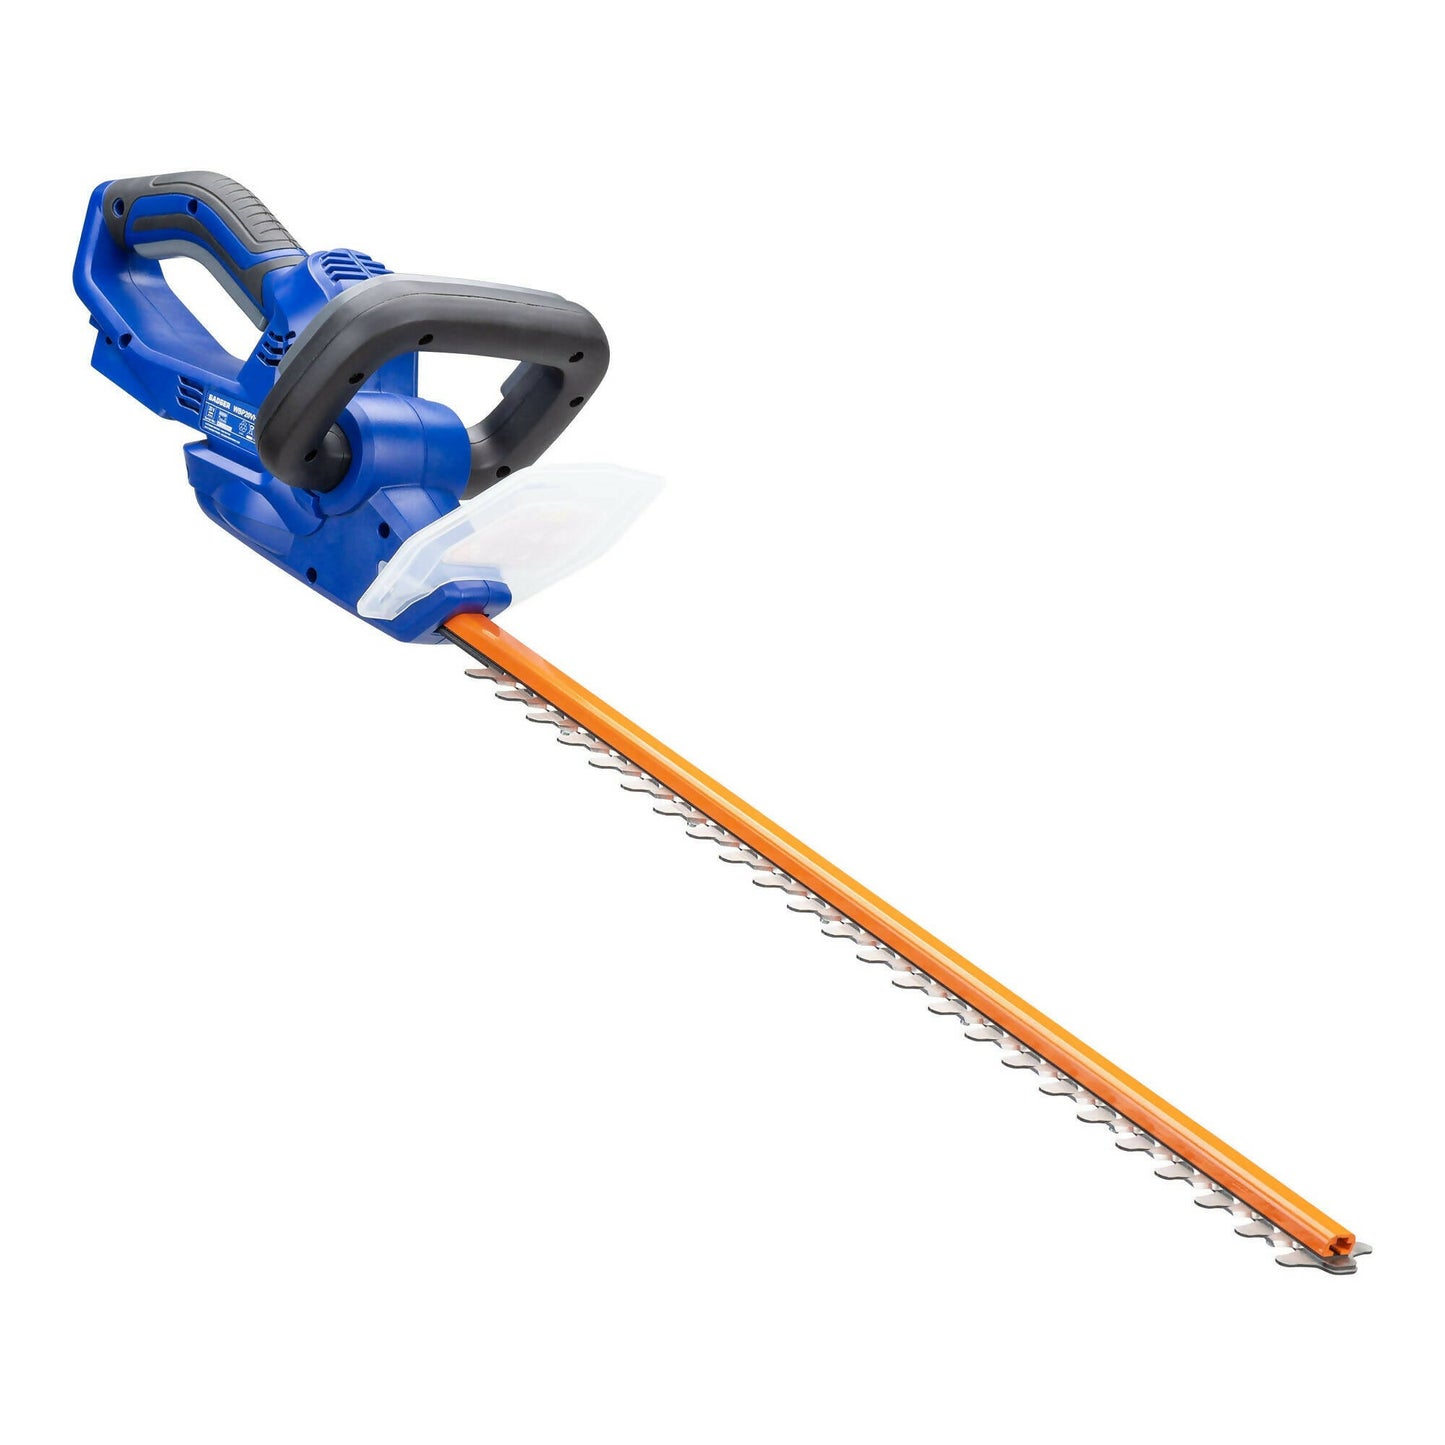 Wild Badger Power Cordless 20 Volt 22-inch Brushed Hedge Trimmer, Includes 2.0 Ah Battery and Clip-on Charger